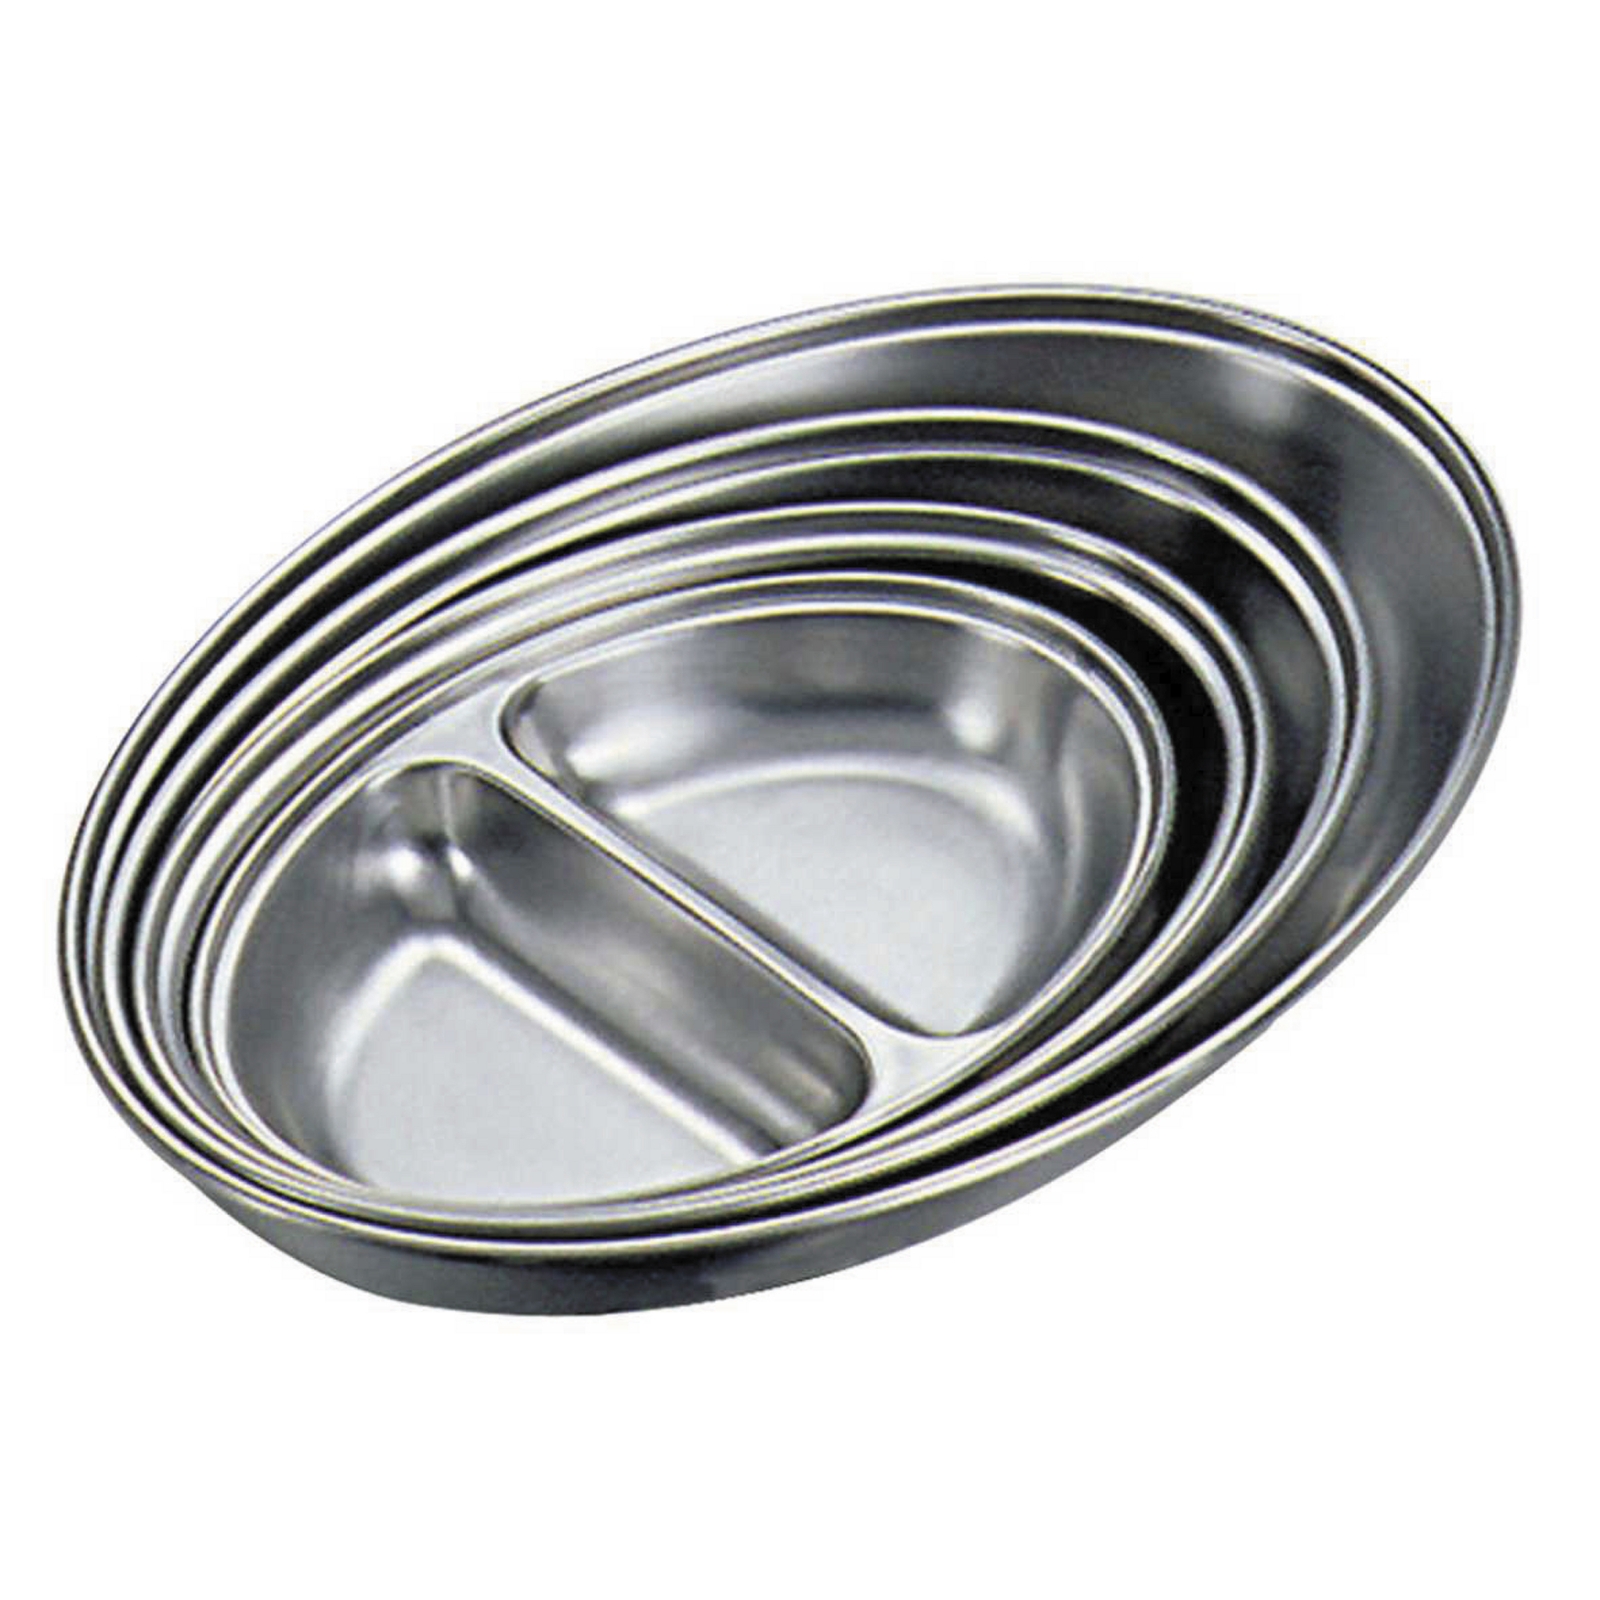 Stainless Steel Divided Serving Dish - 25cm